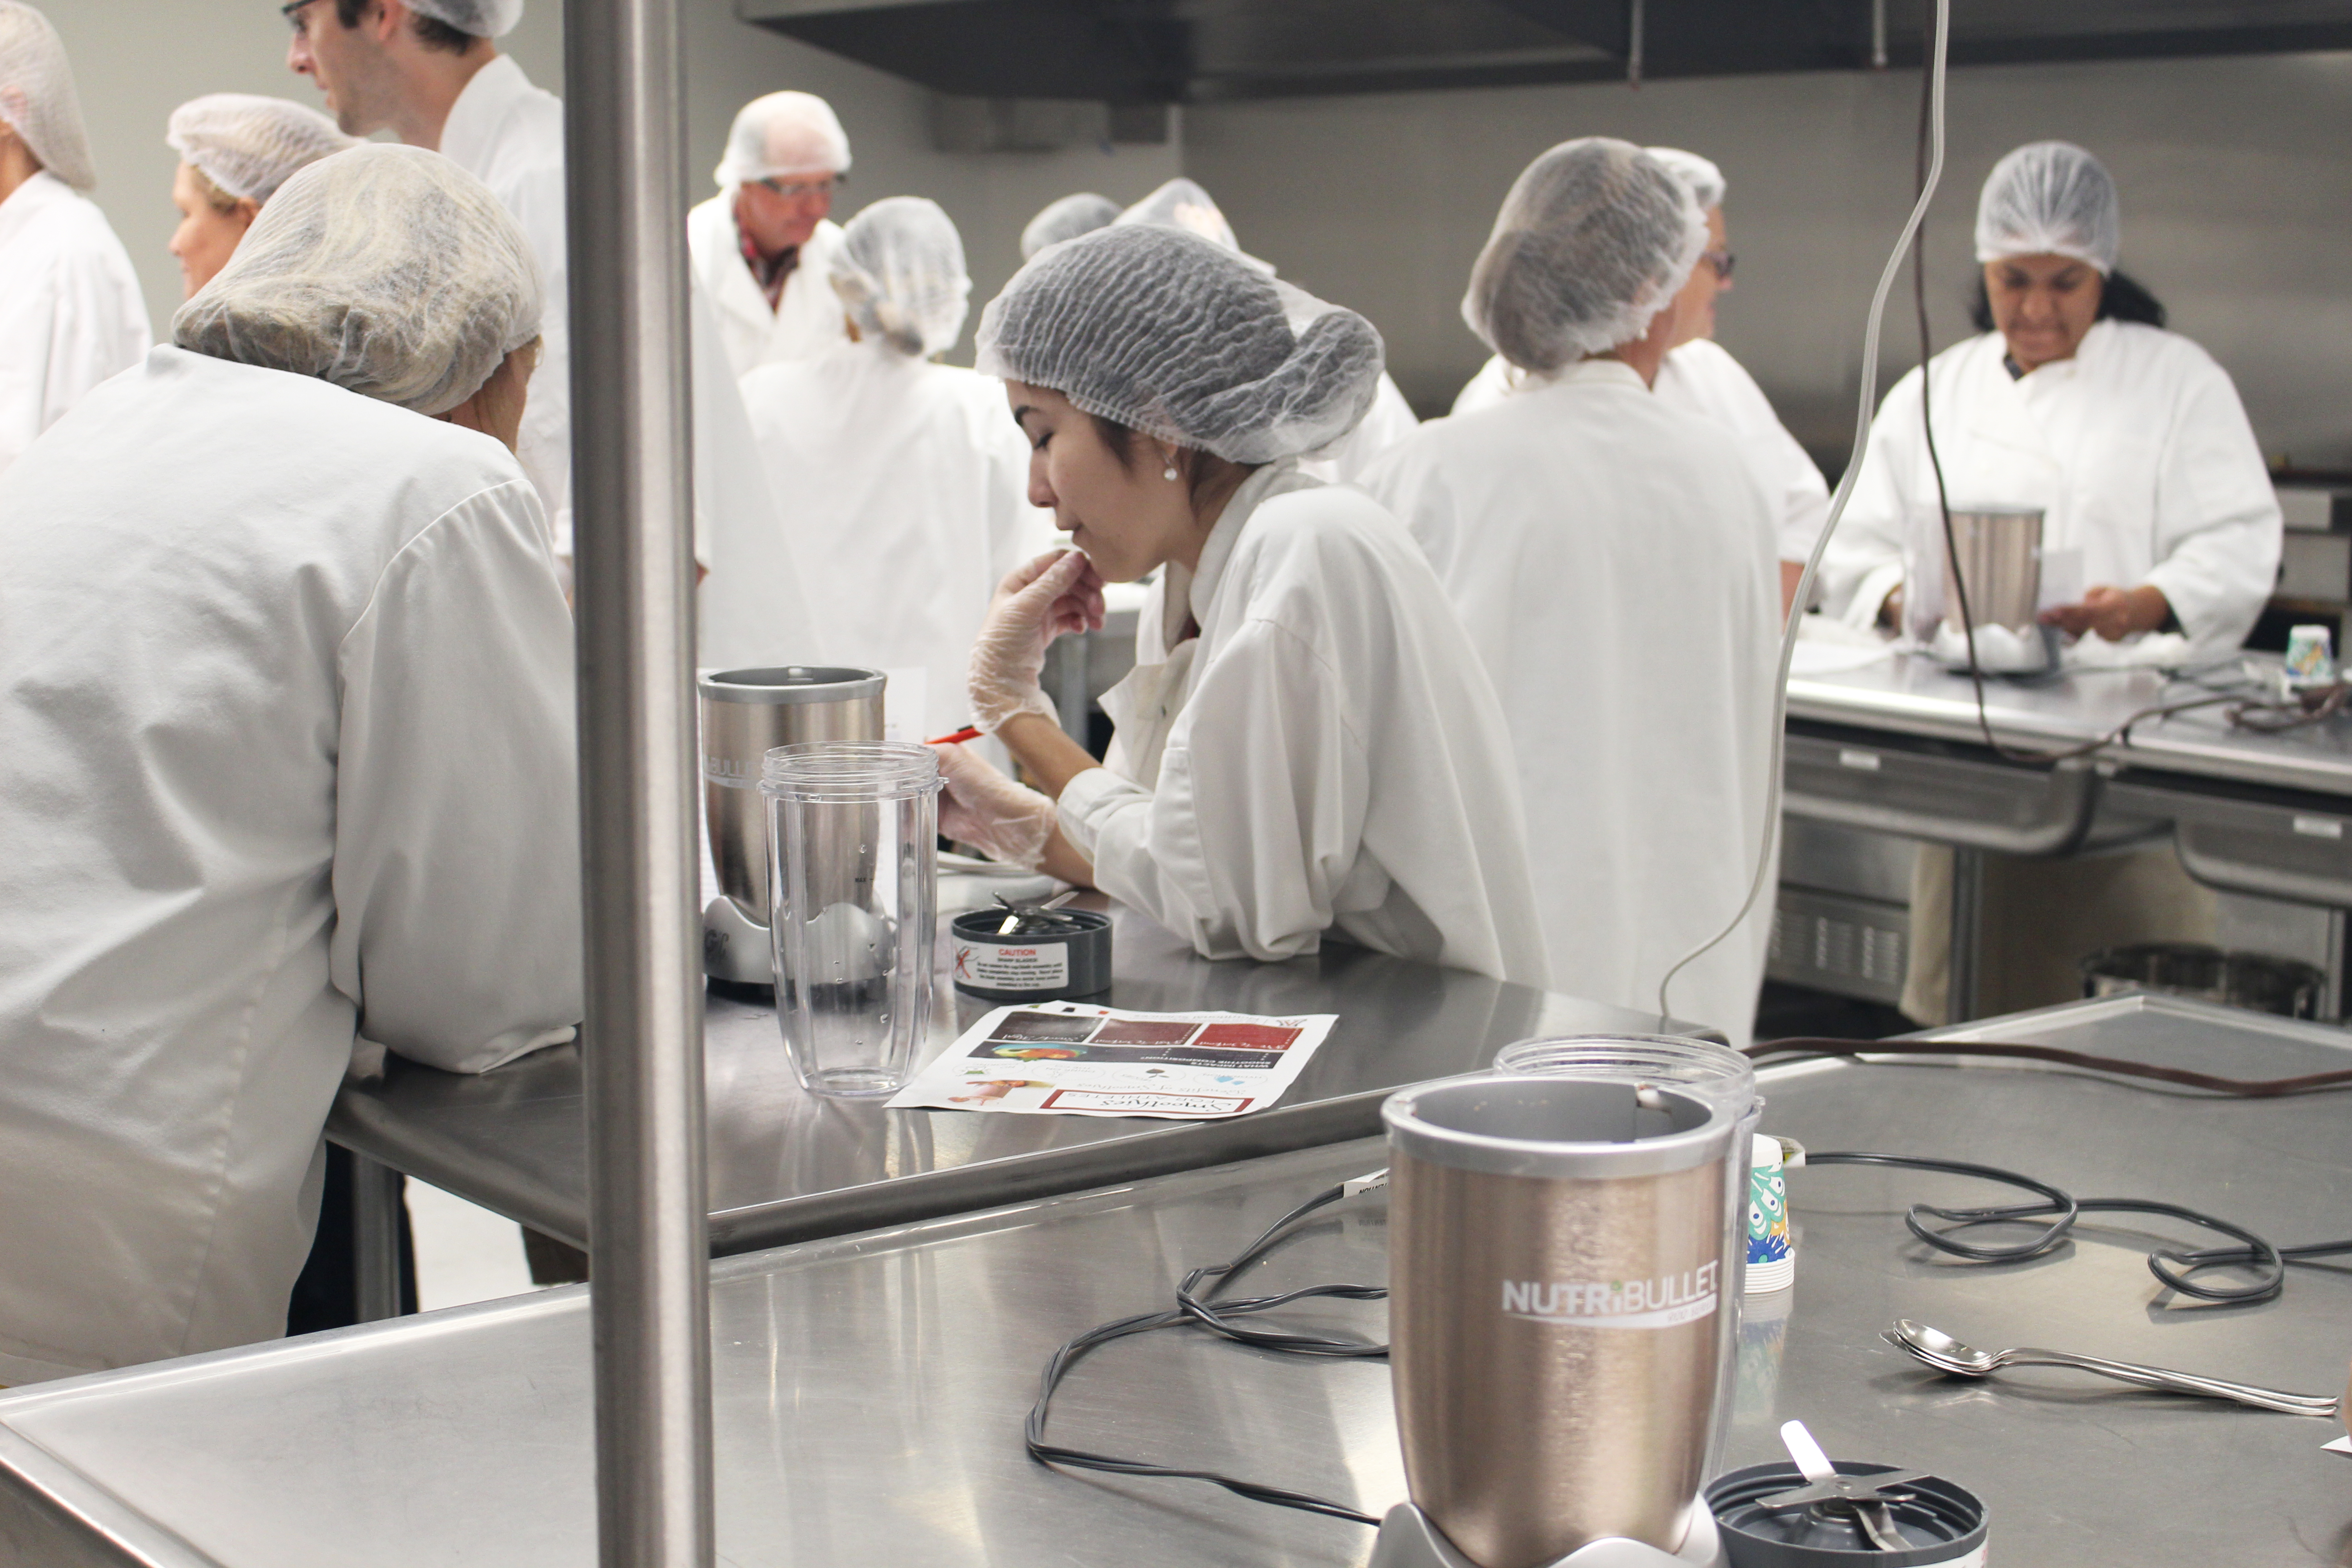 A room full of college students and faculty wearing white coats and hair nets work in an industrial kitchen.